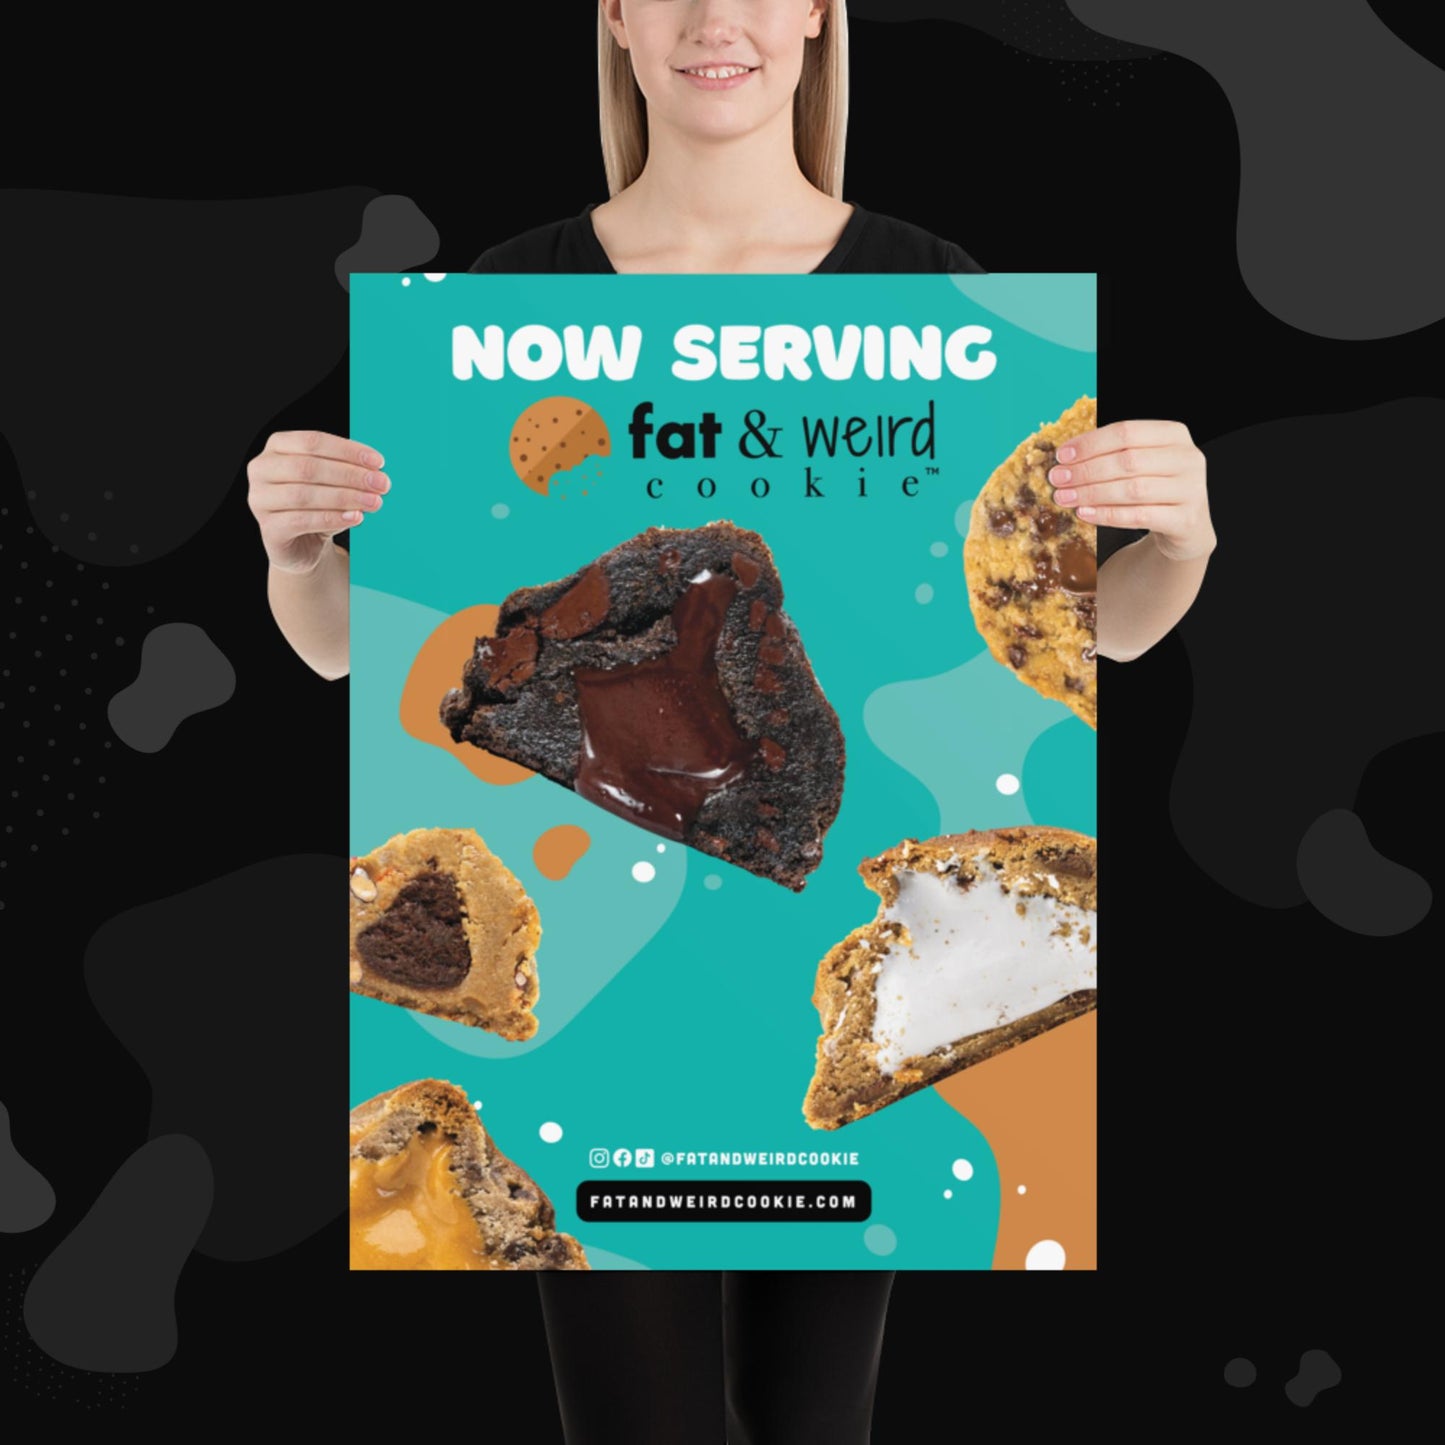 Now Serving - Tall Poster